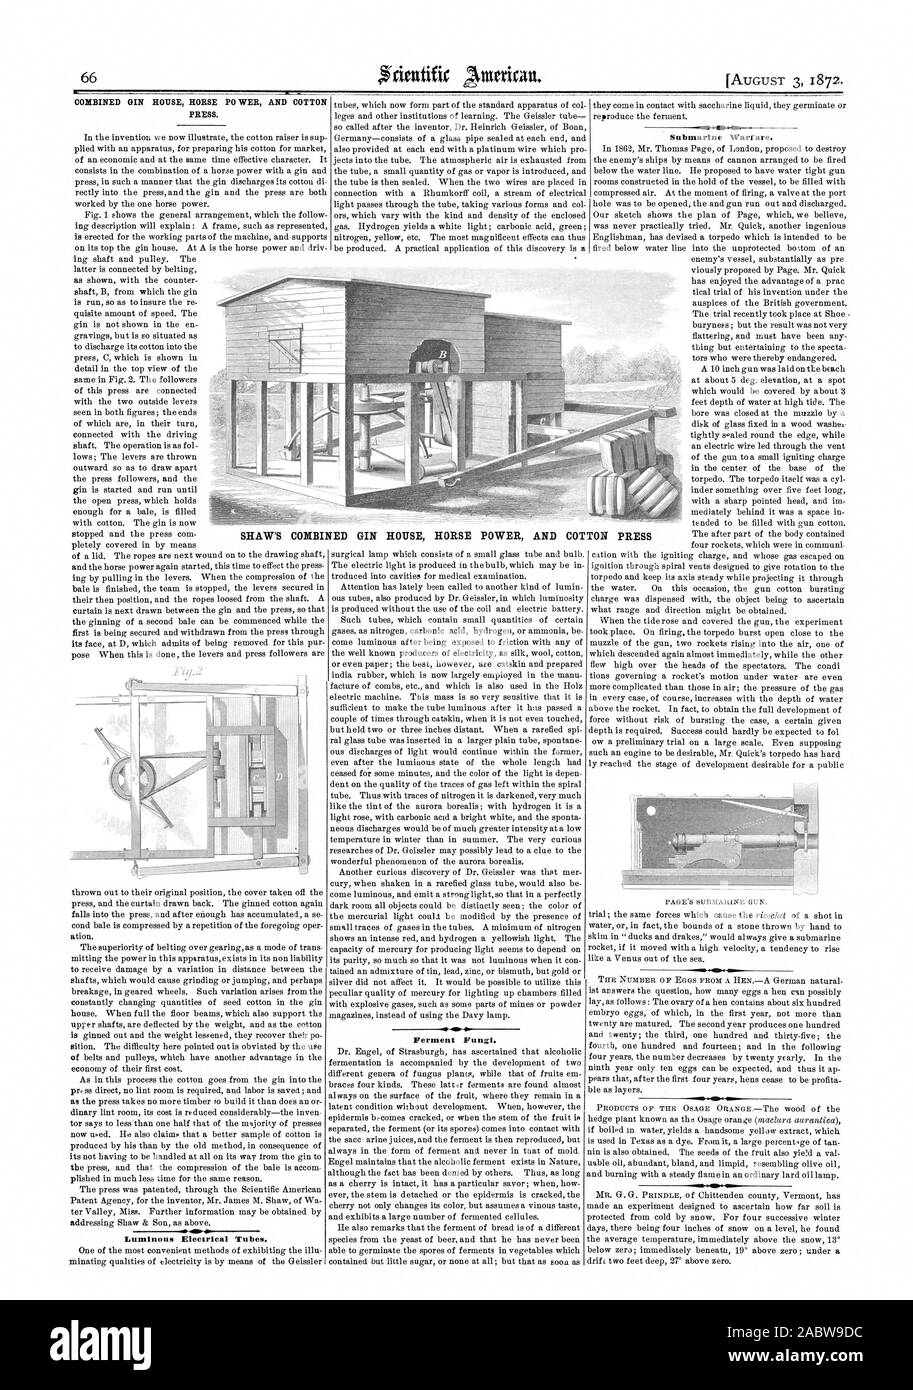 Luminous Electrical Tubes. Ferment Fungi. Submarine Warfare. NED GIN HOUSE HORSE POWER AND COT TON PRESS, scientific american, 1872-08-03 Stock Photo